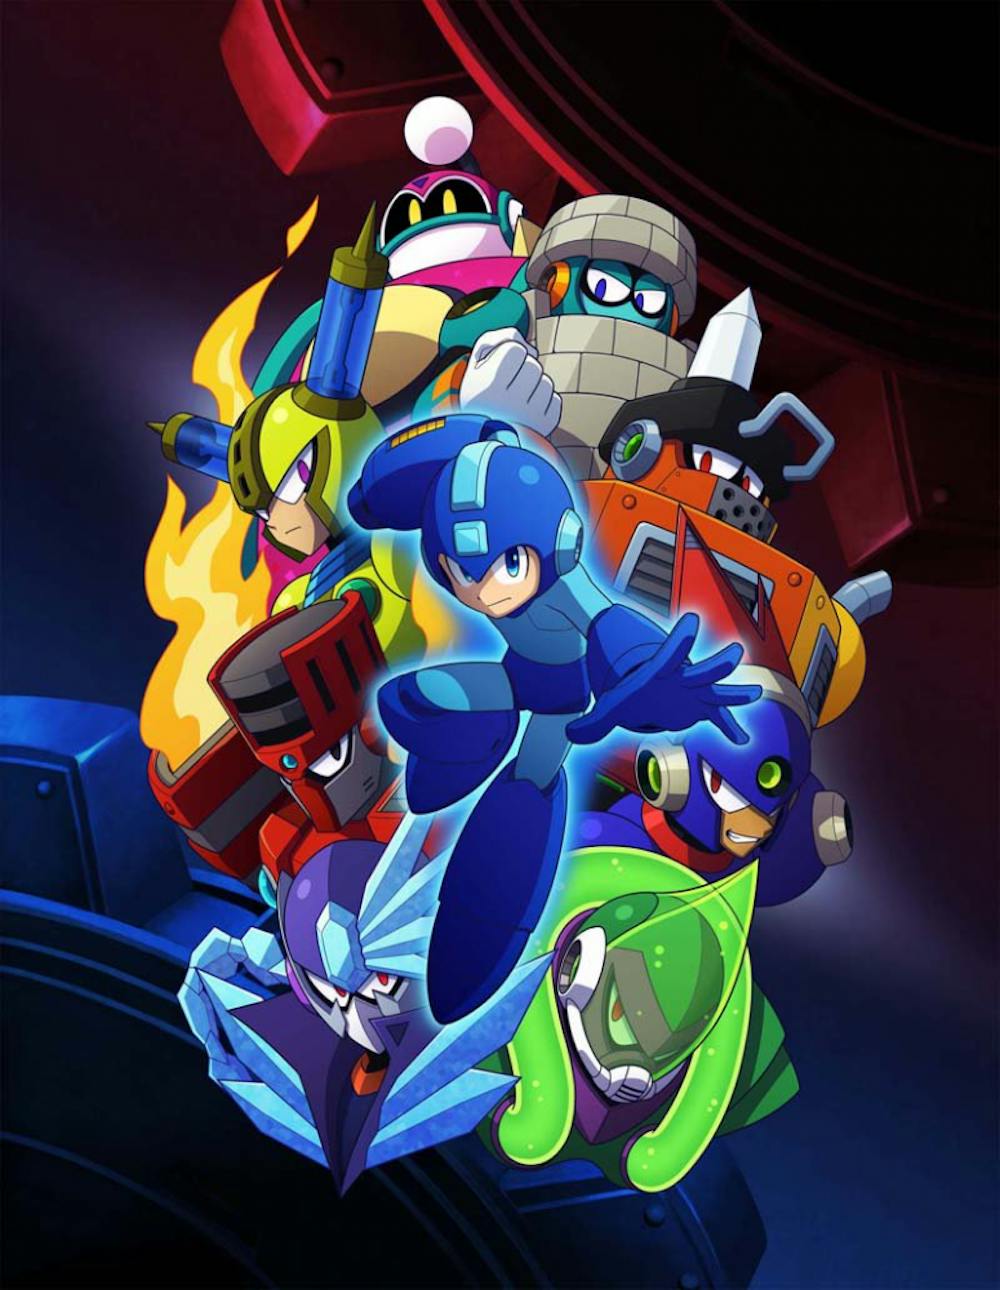 "Mega Man 11" is out now for PC, PlayStation&nbsp;4, Xbox One and Switch.